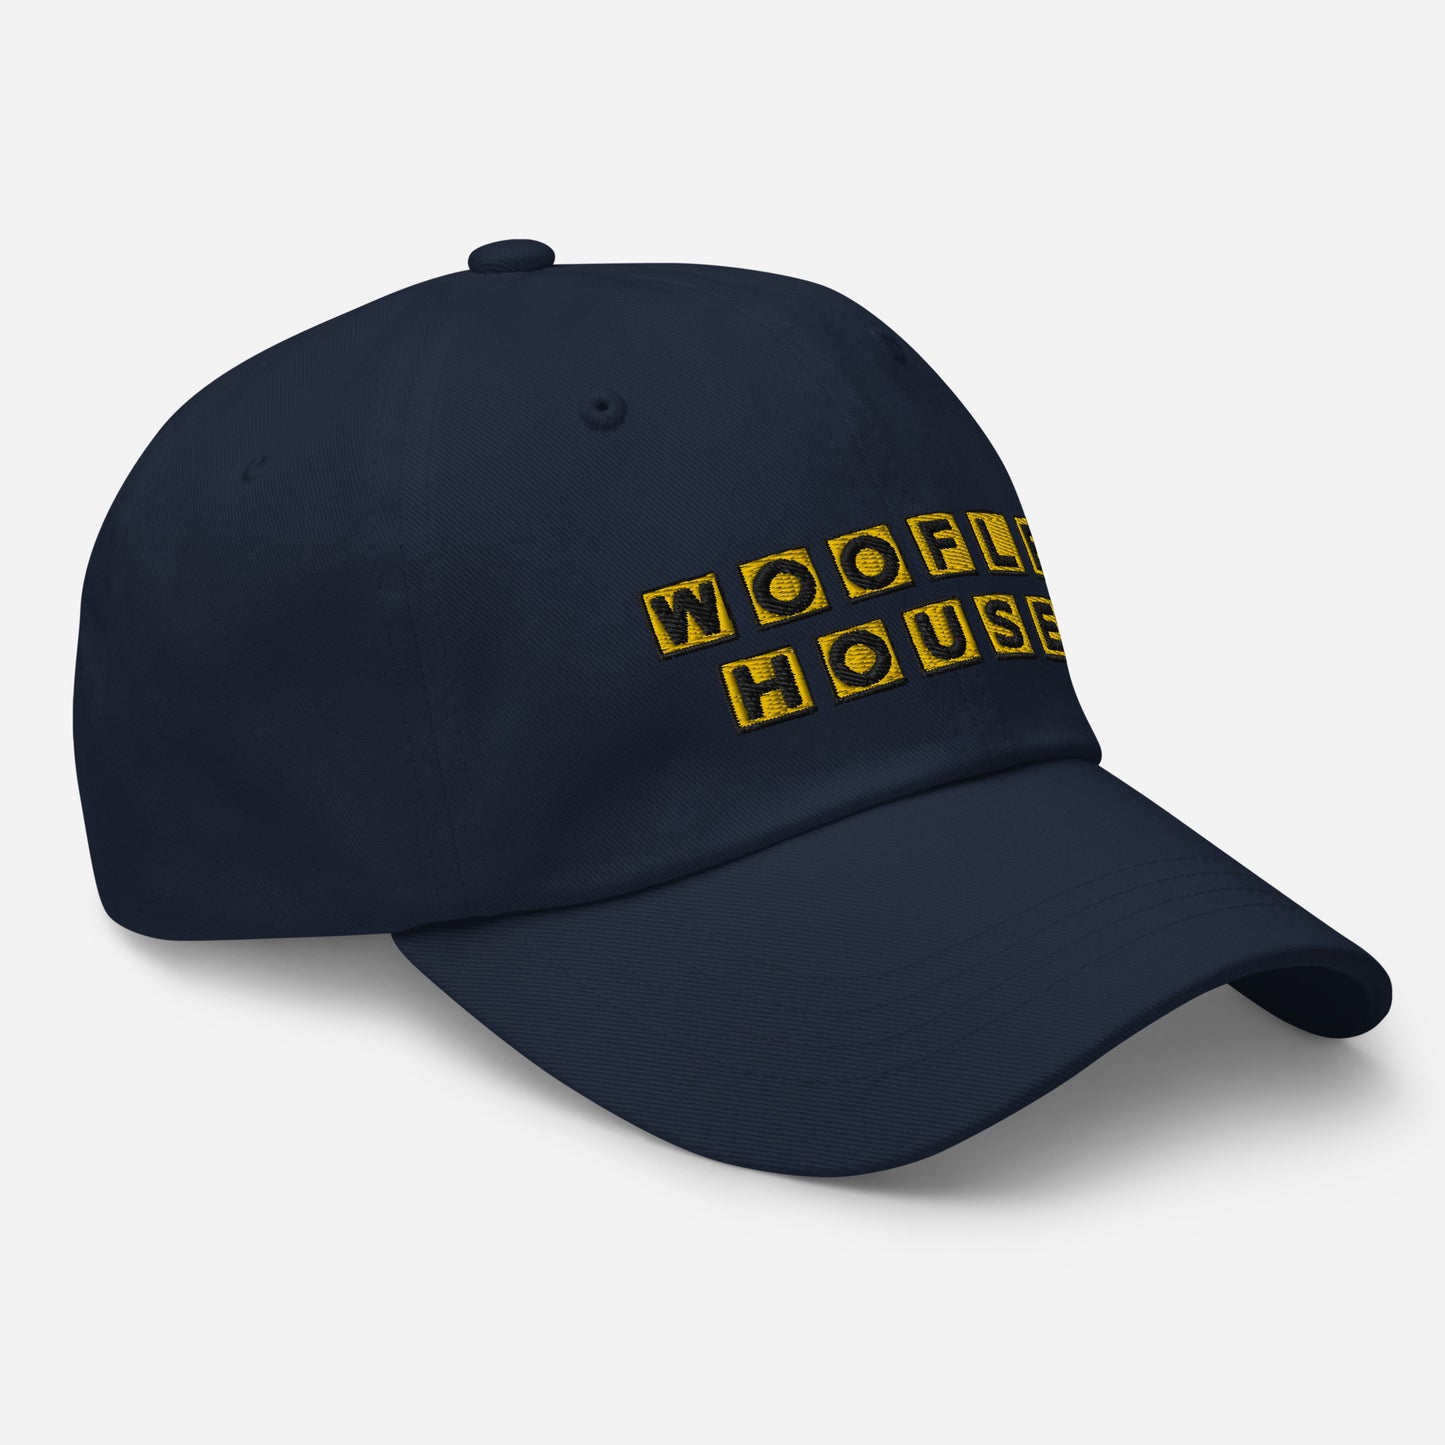 Woofle House Dad hat